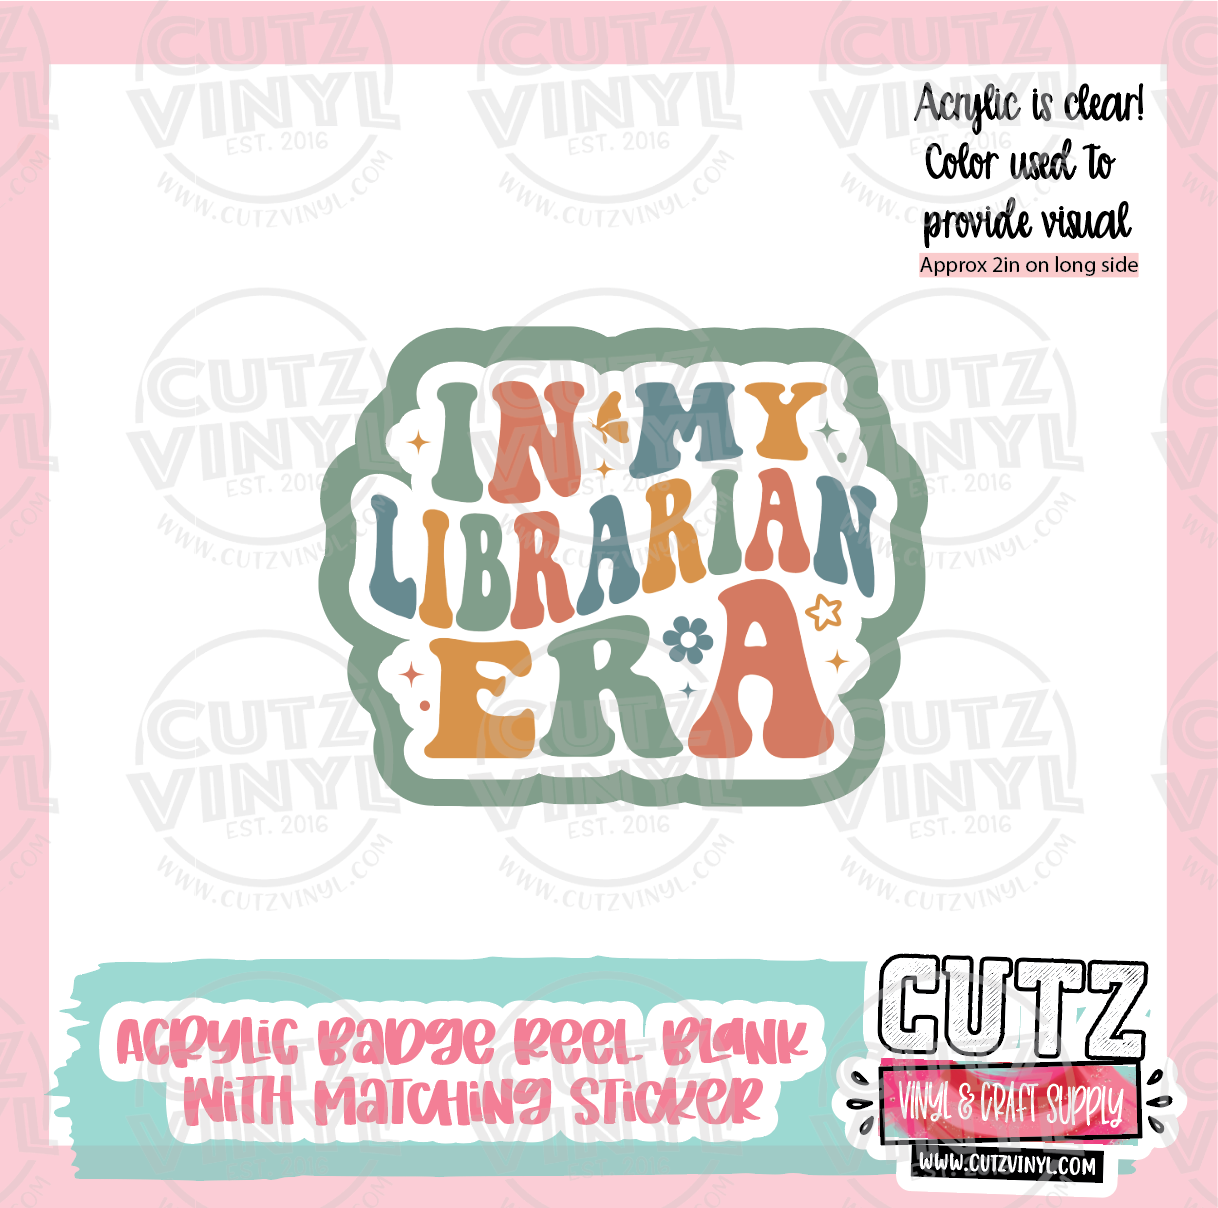 Librarian Era - Acrylic Badge Reel Blank and Matching Sticker